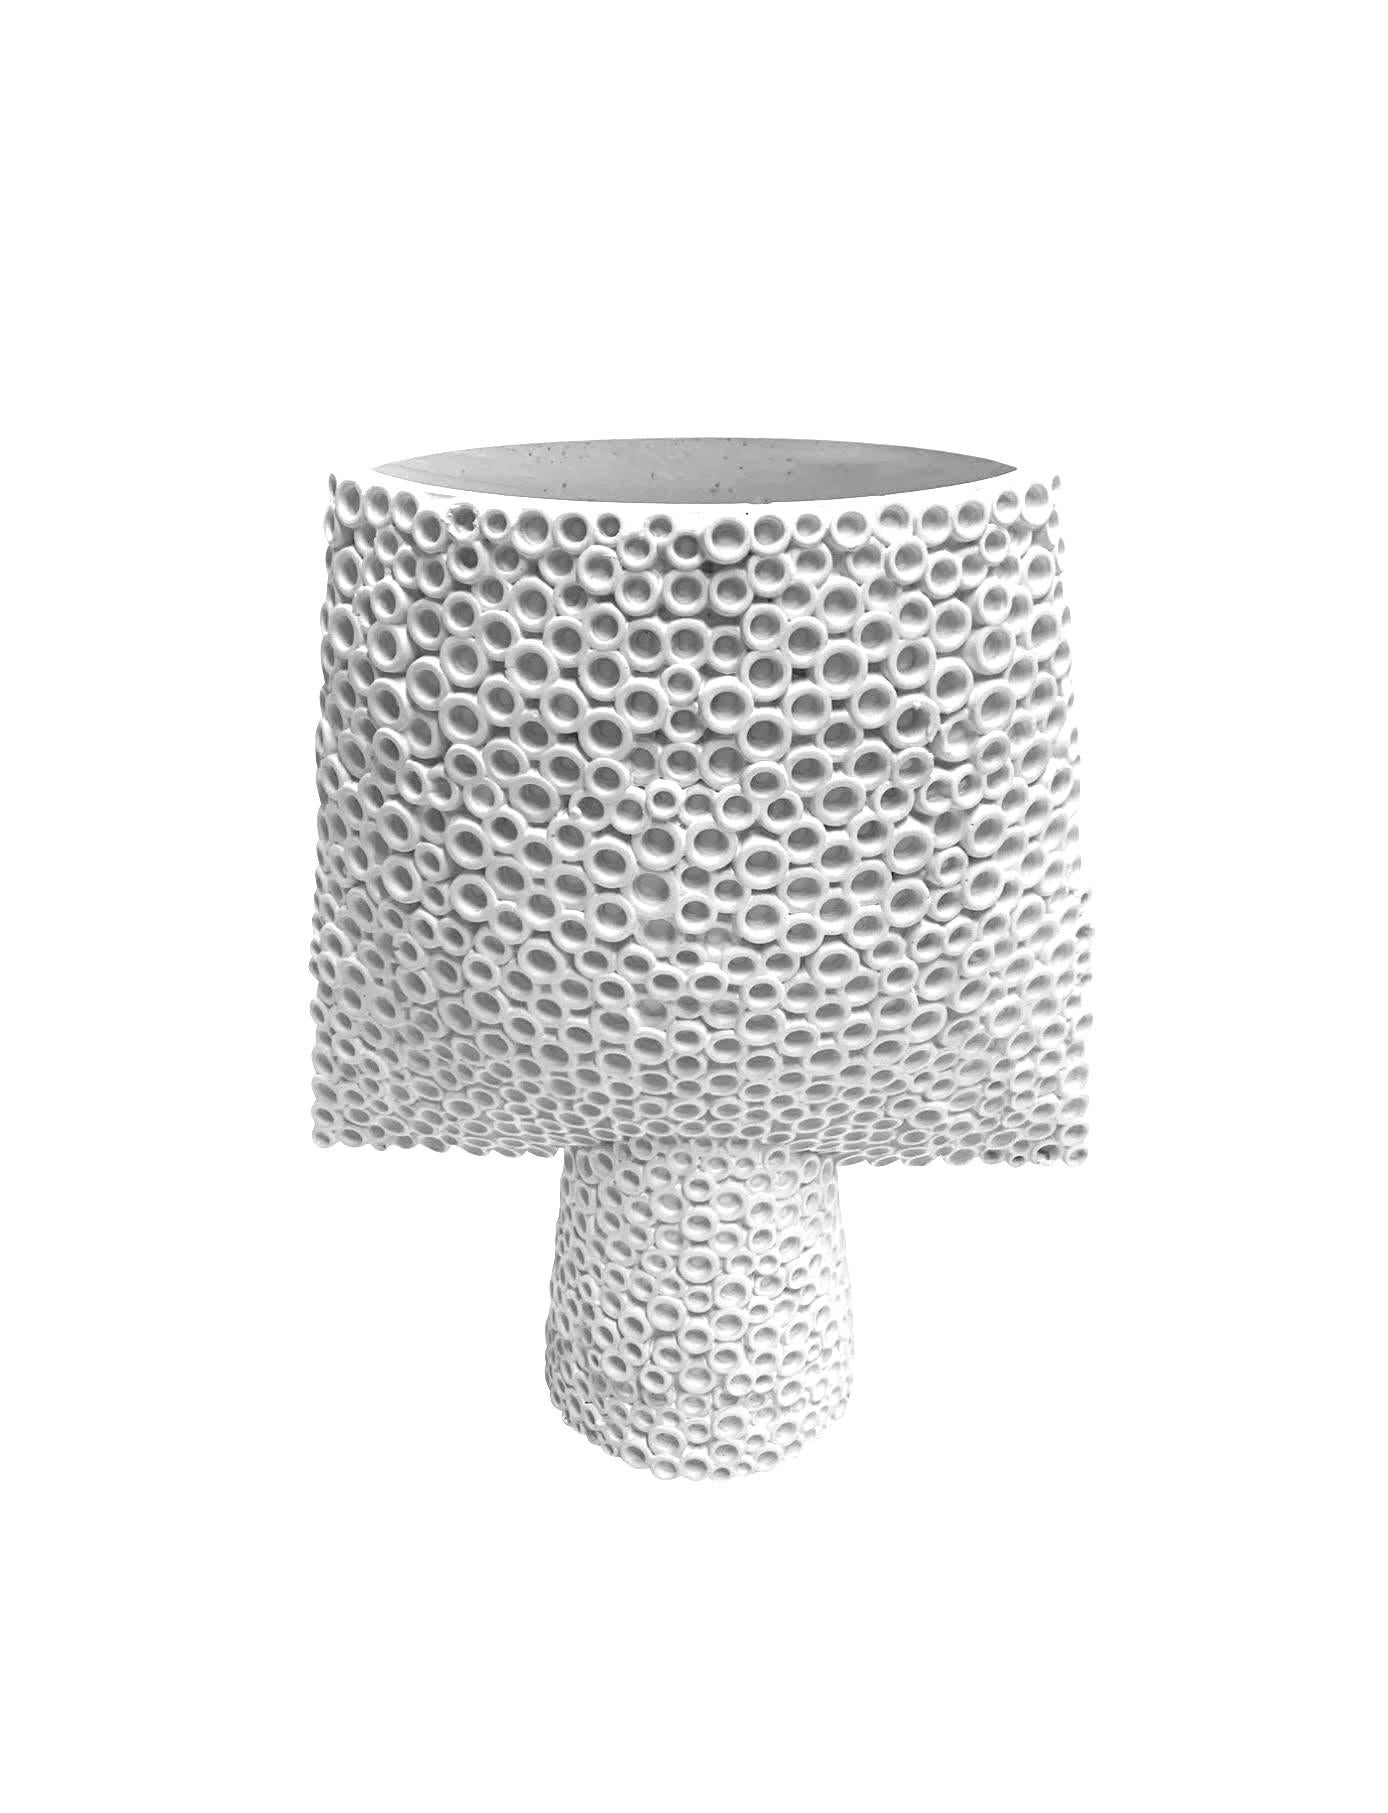 Contemporary Danish designed bone white arrow shaped vase.
Bold surface texture.
Part of a very large collection.